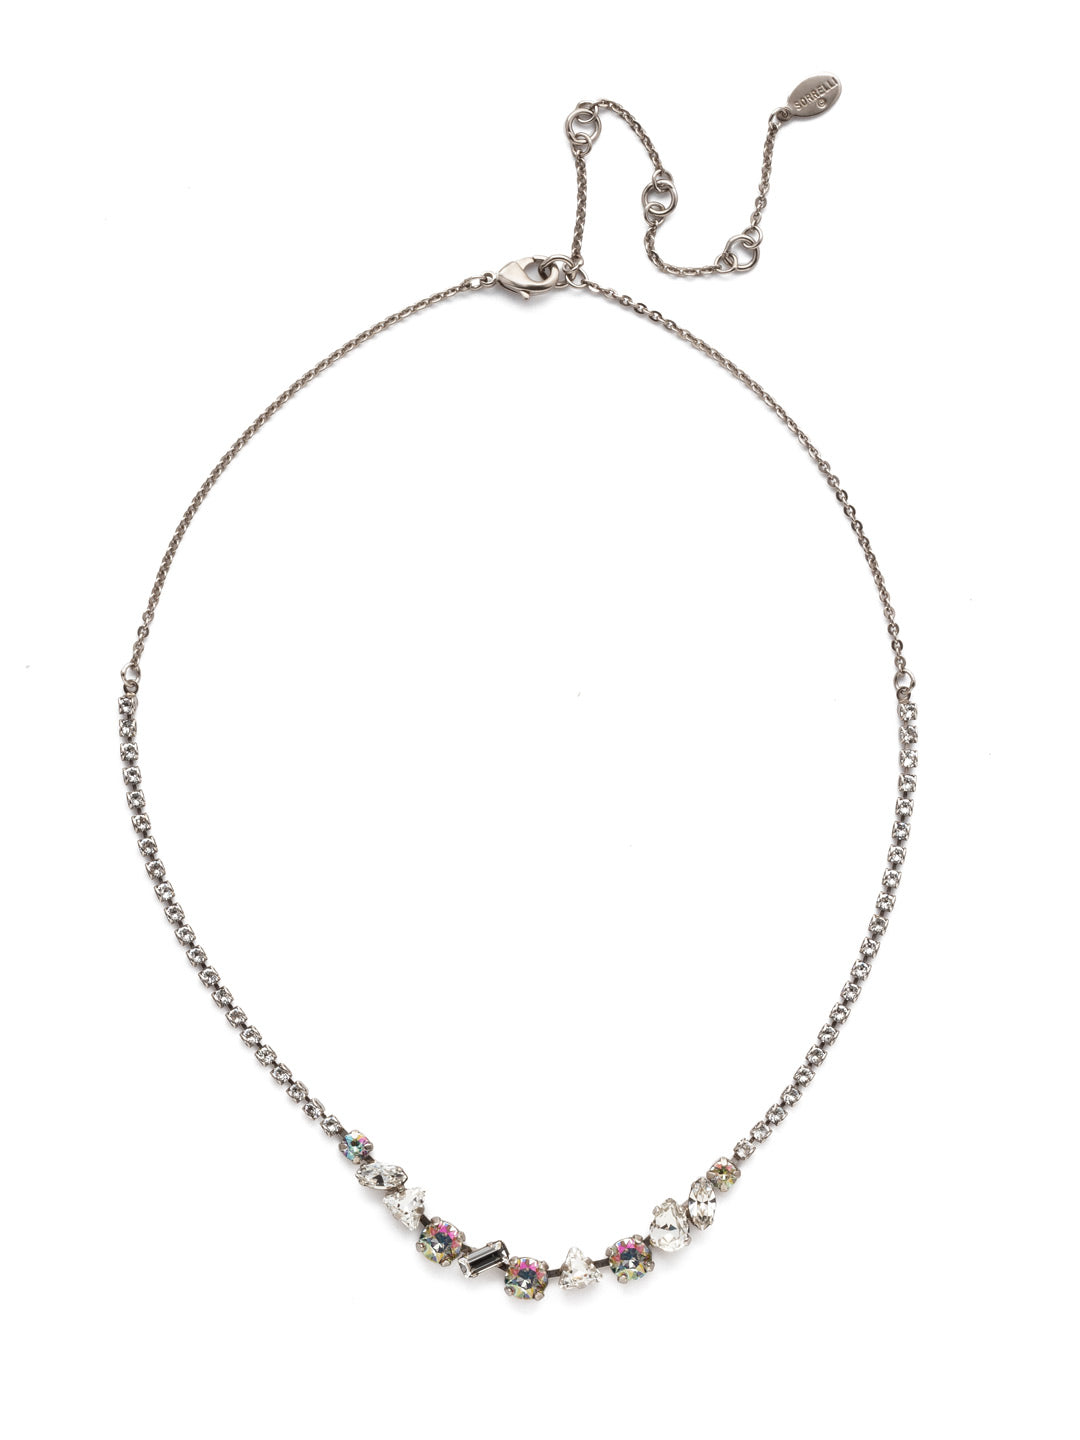 Cherished Tennis Necklace - NEK19ASCRE - <p>Fasten on this classic piece when you can't decide on a sparkling shape. This stunning crystal classic necklace features it all and provides all the shine you need. From Sorrelli's Crystal Envy collection in our Antique Silver-tone finish.</p>